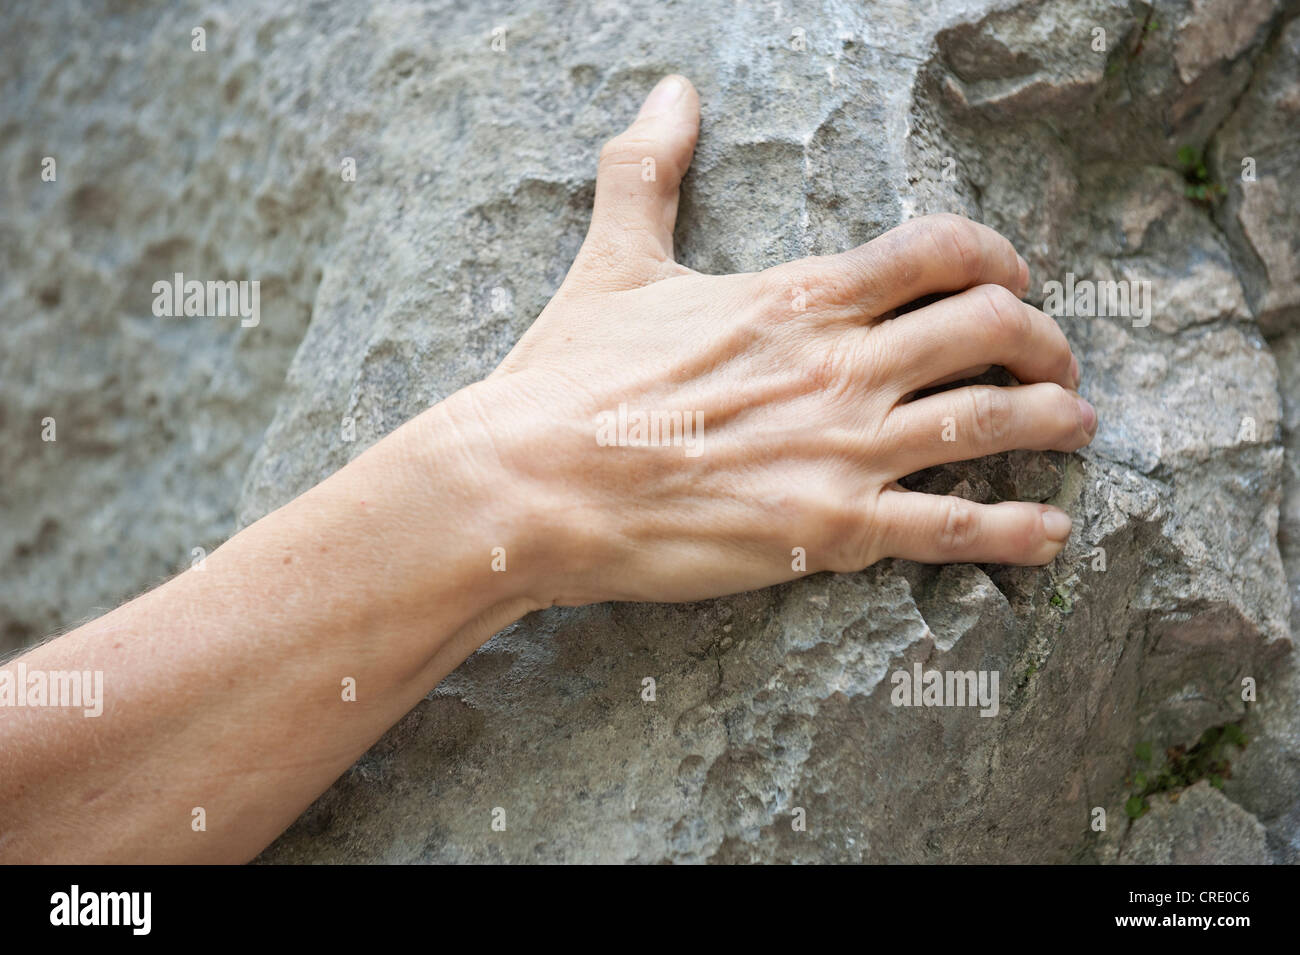 Hand of a mountaineer, climber, gripping a rock, rock climbing, Arco, Italy, Europe Stock Photo